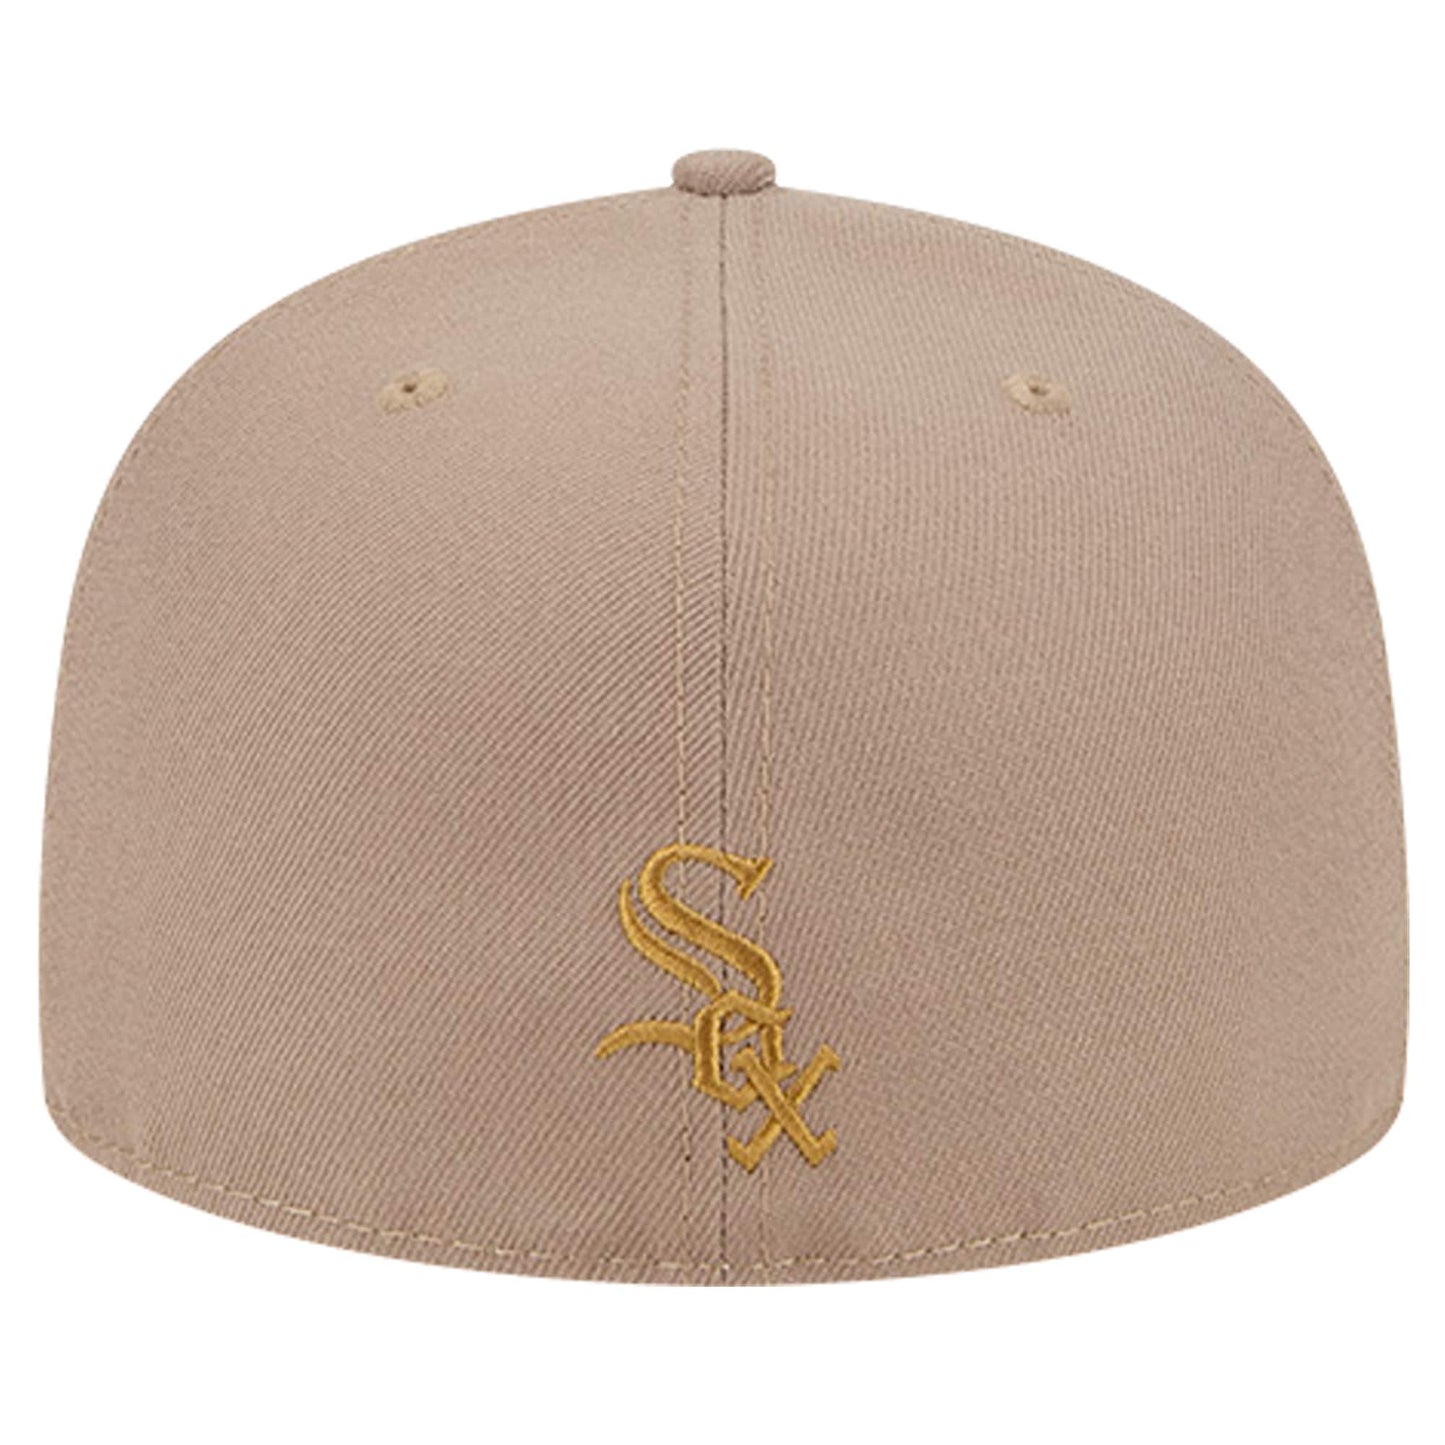 New Era 59FIFTY Chicago White Sox Sidepatch